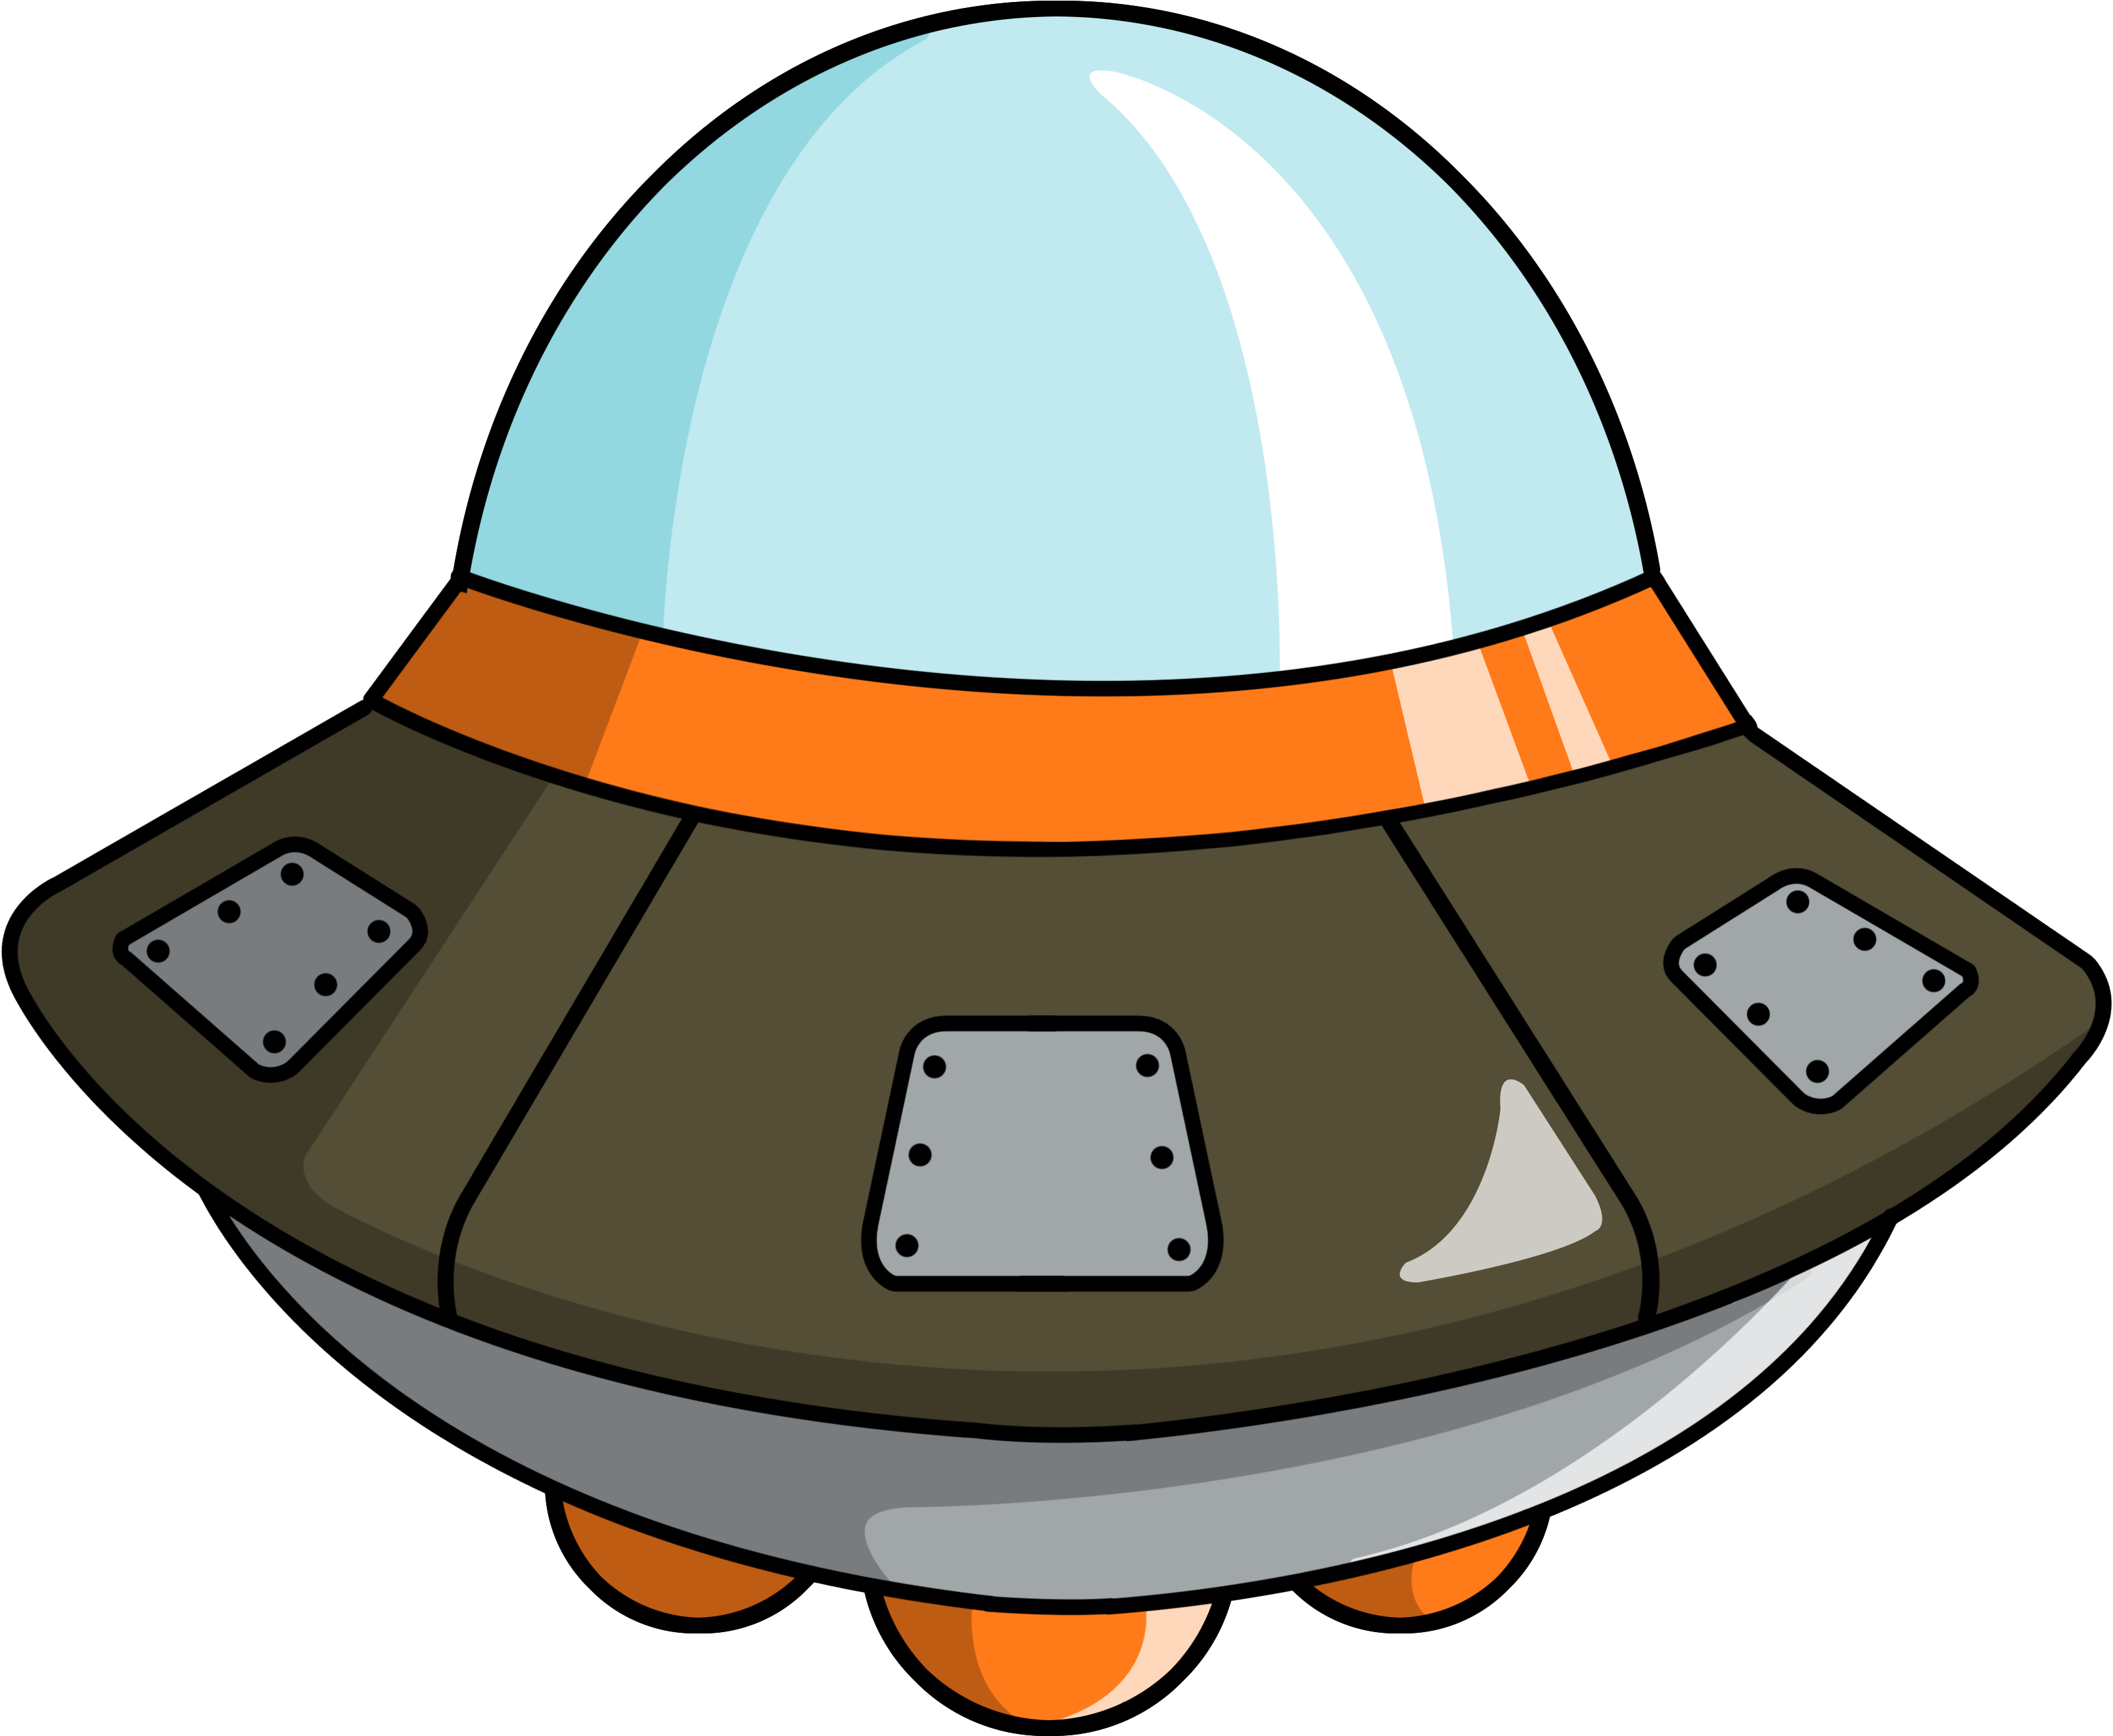 Free To Use Public Domain Space Clip Art - Alien Spaceship Cartoon Png (4000x3000)